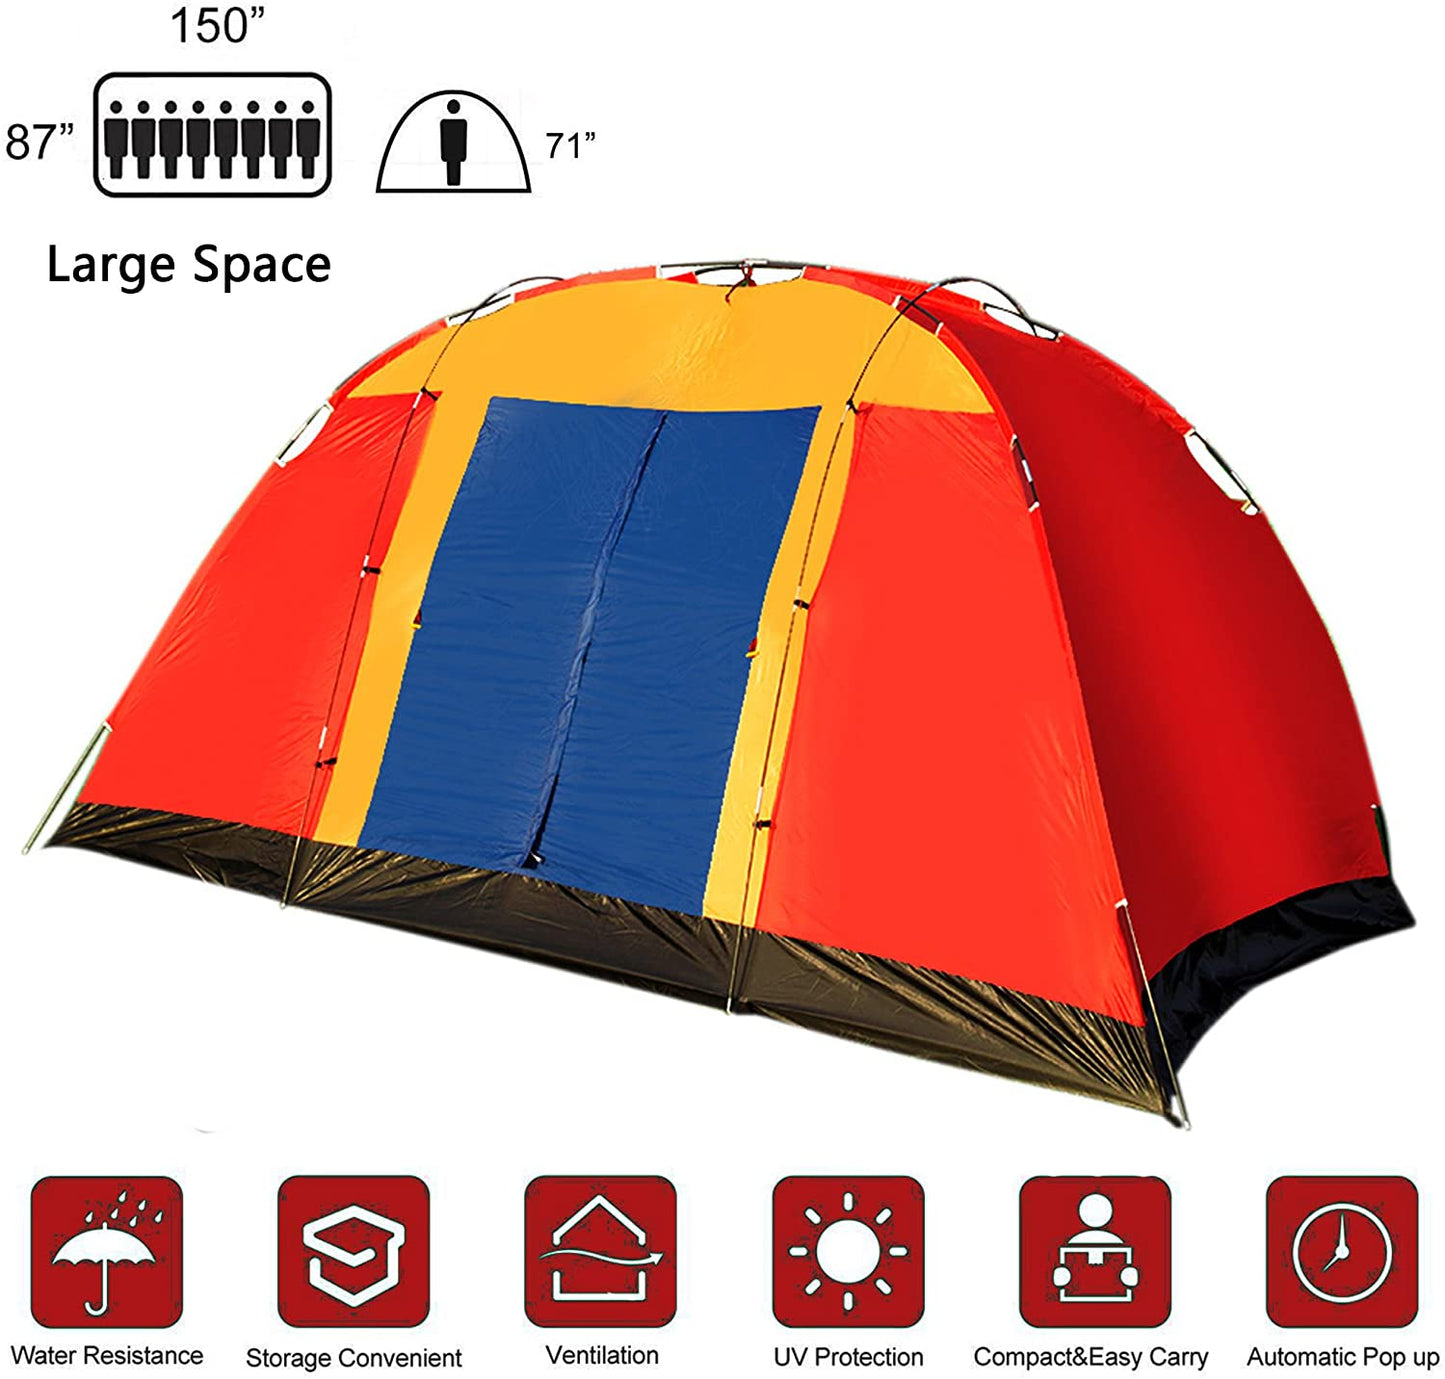 8 Person Backyard Camping Tent Easy Setup,12.5ft